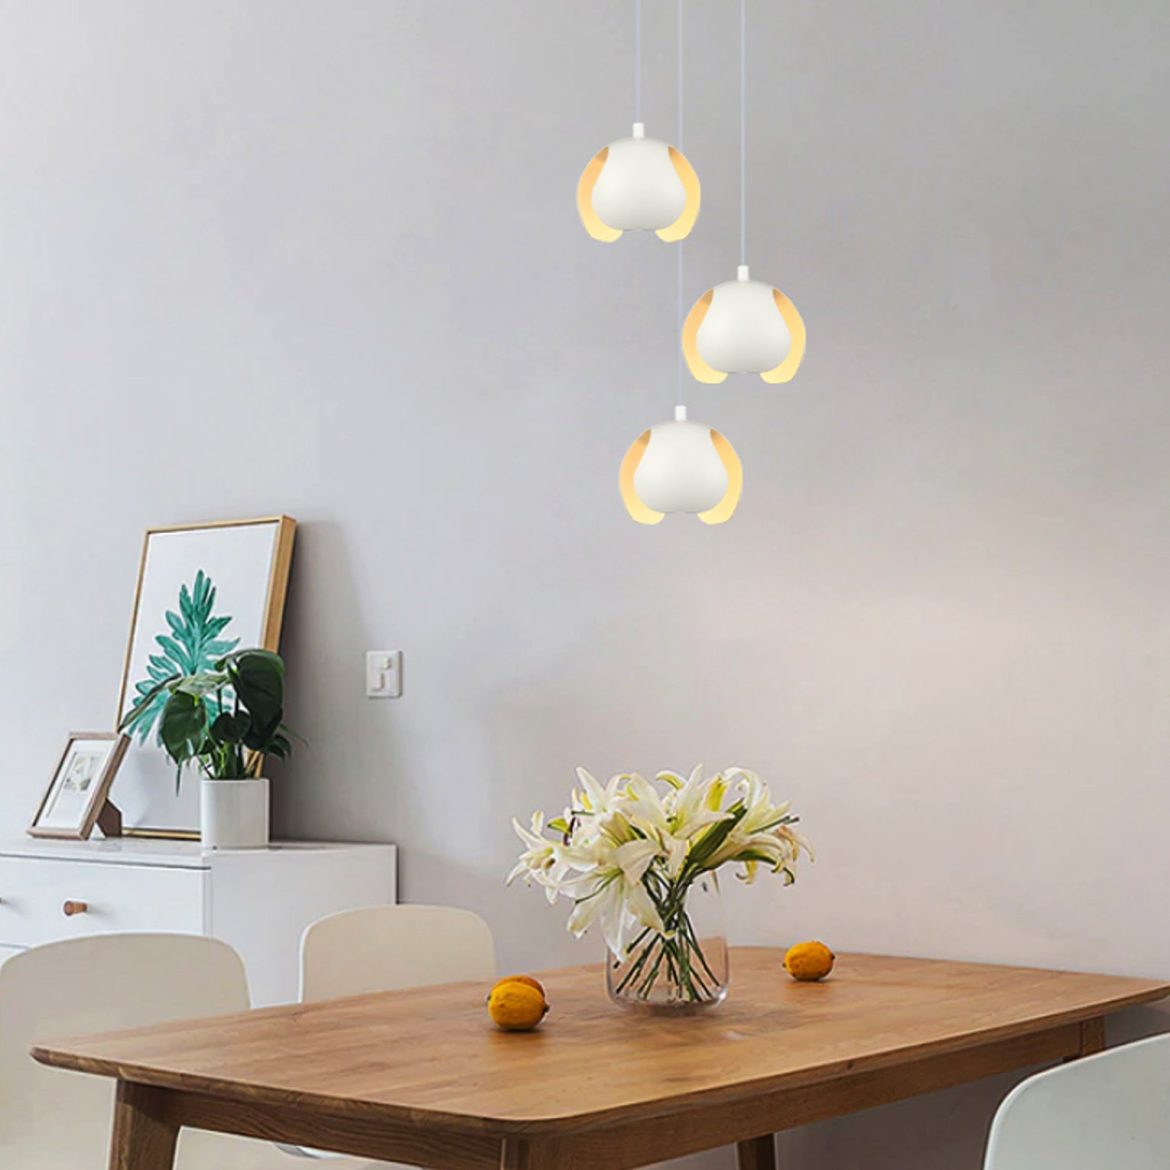 Shining a Light on Room Spotlights: How to Choose the Perfect Fixtures for Your Space